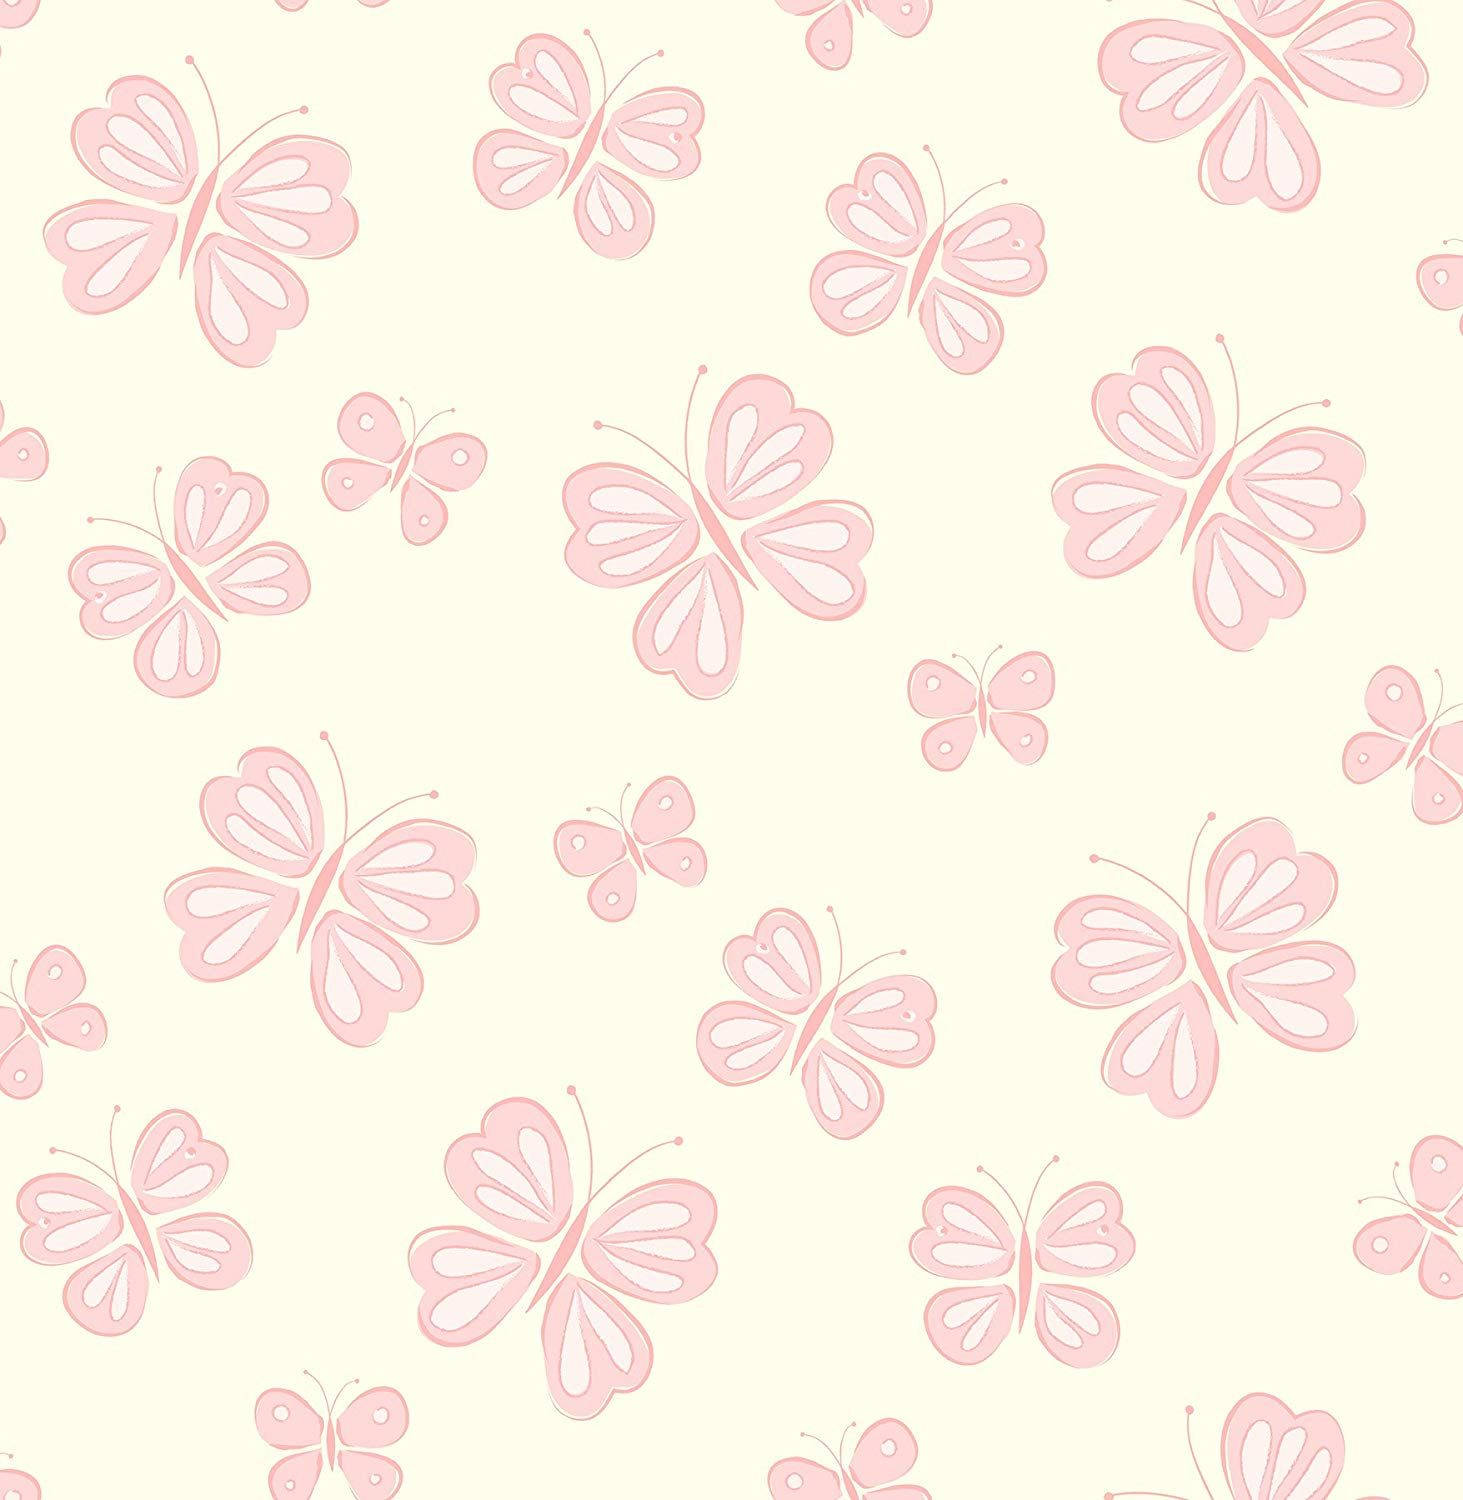 Background With Cute Pink Butterfly Design